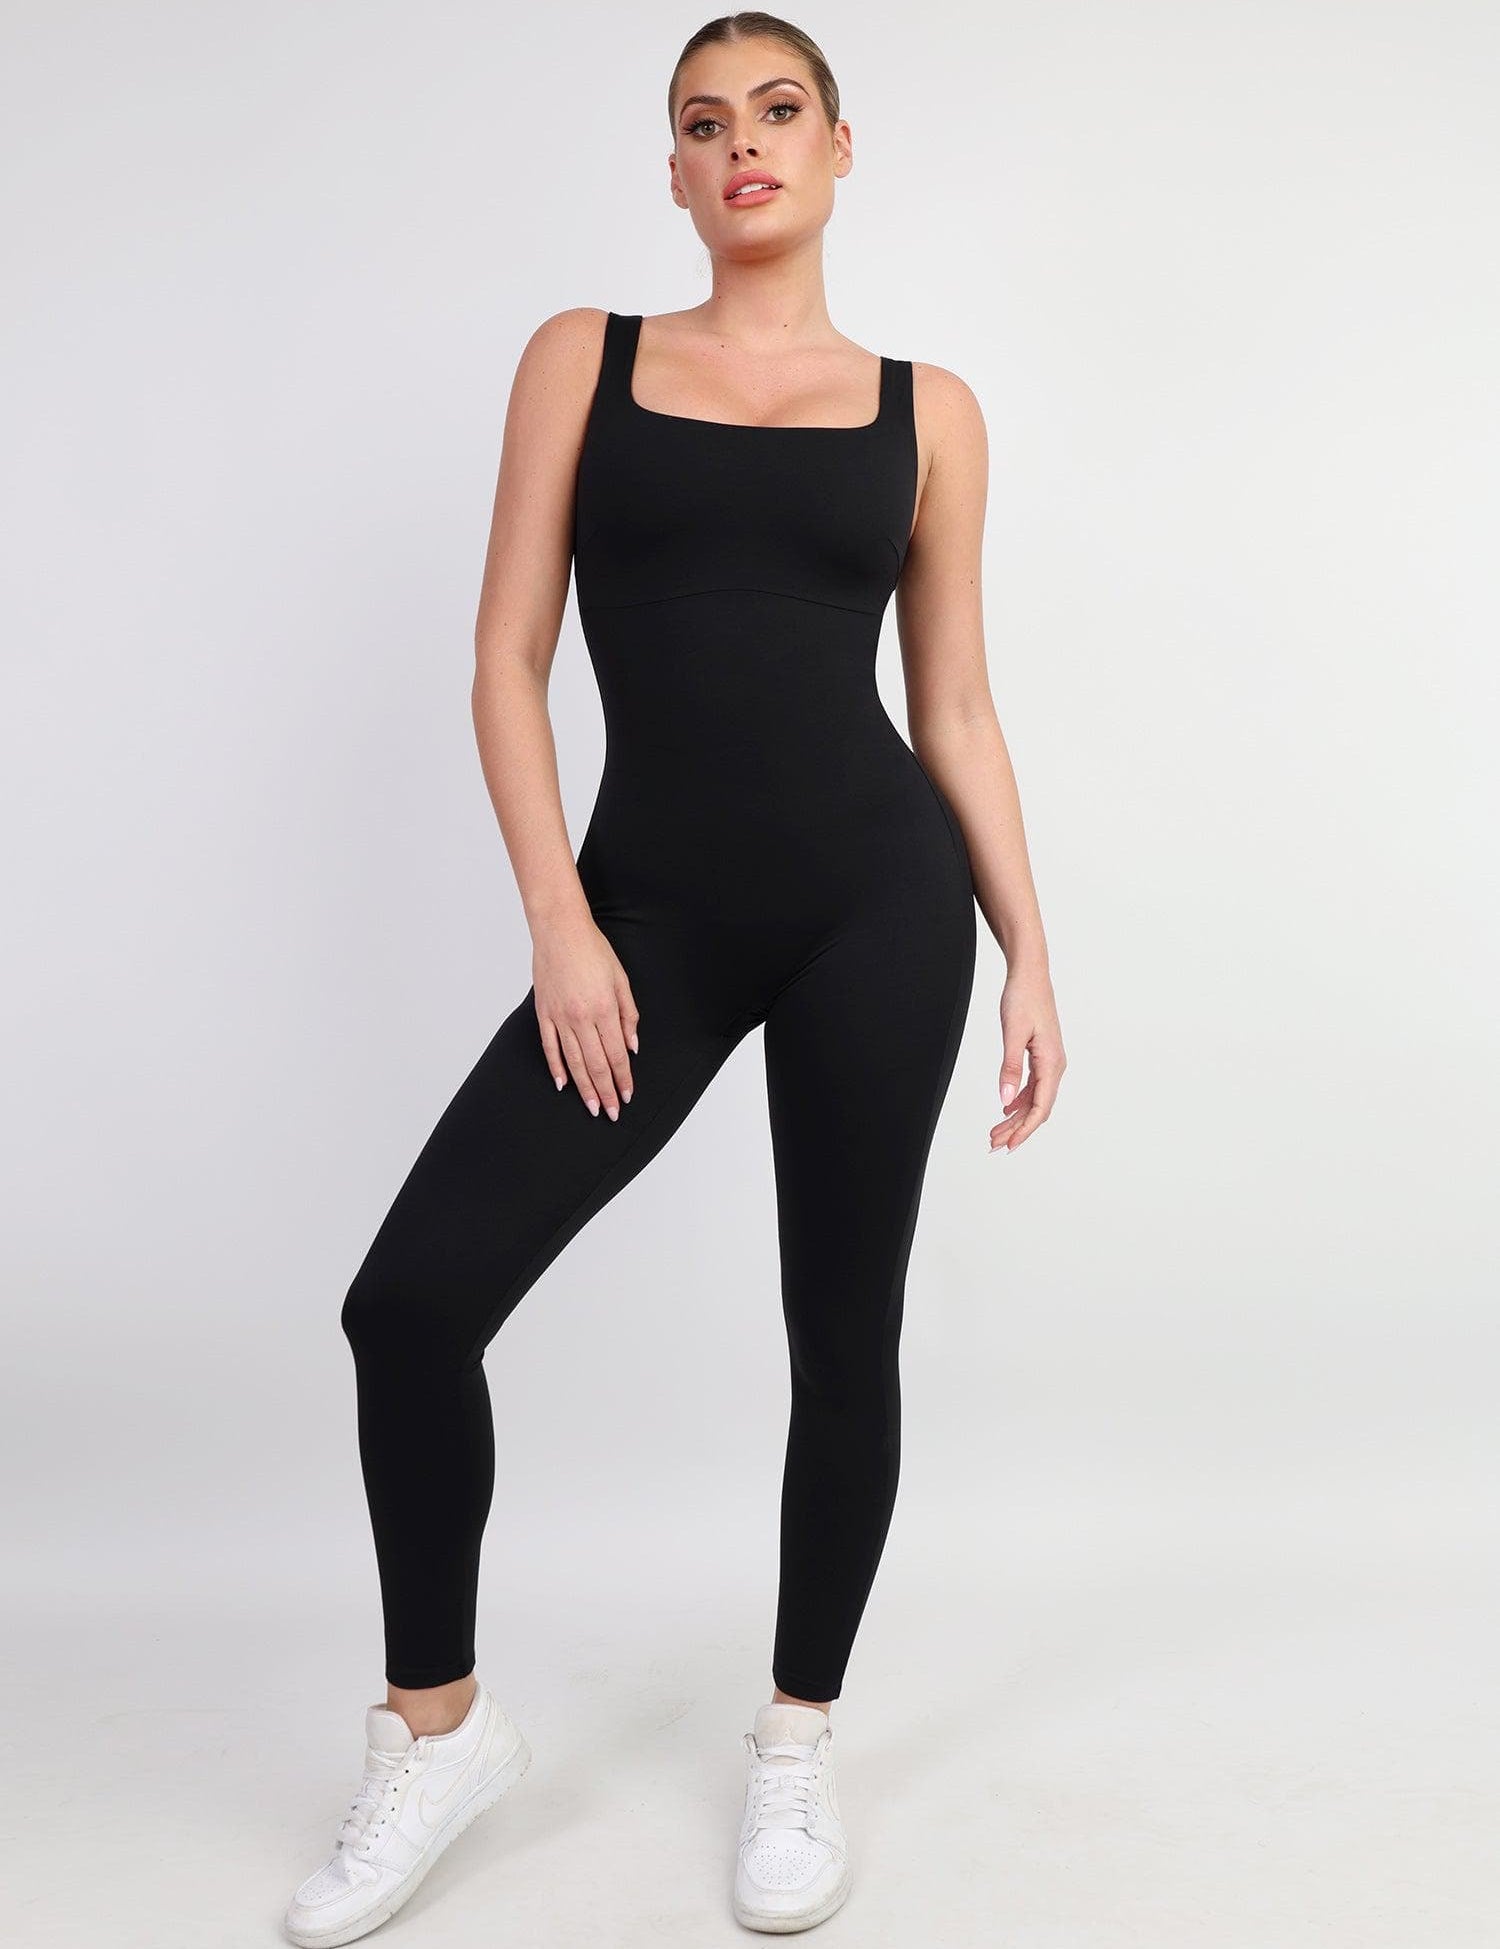  S One Piece Tank Top Thigh Slimming Workout Jumpsuit